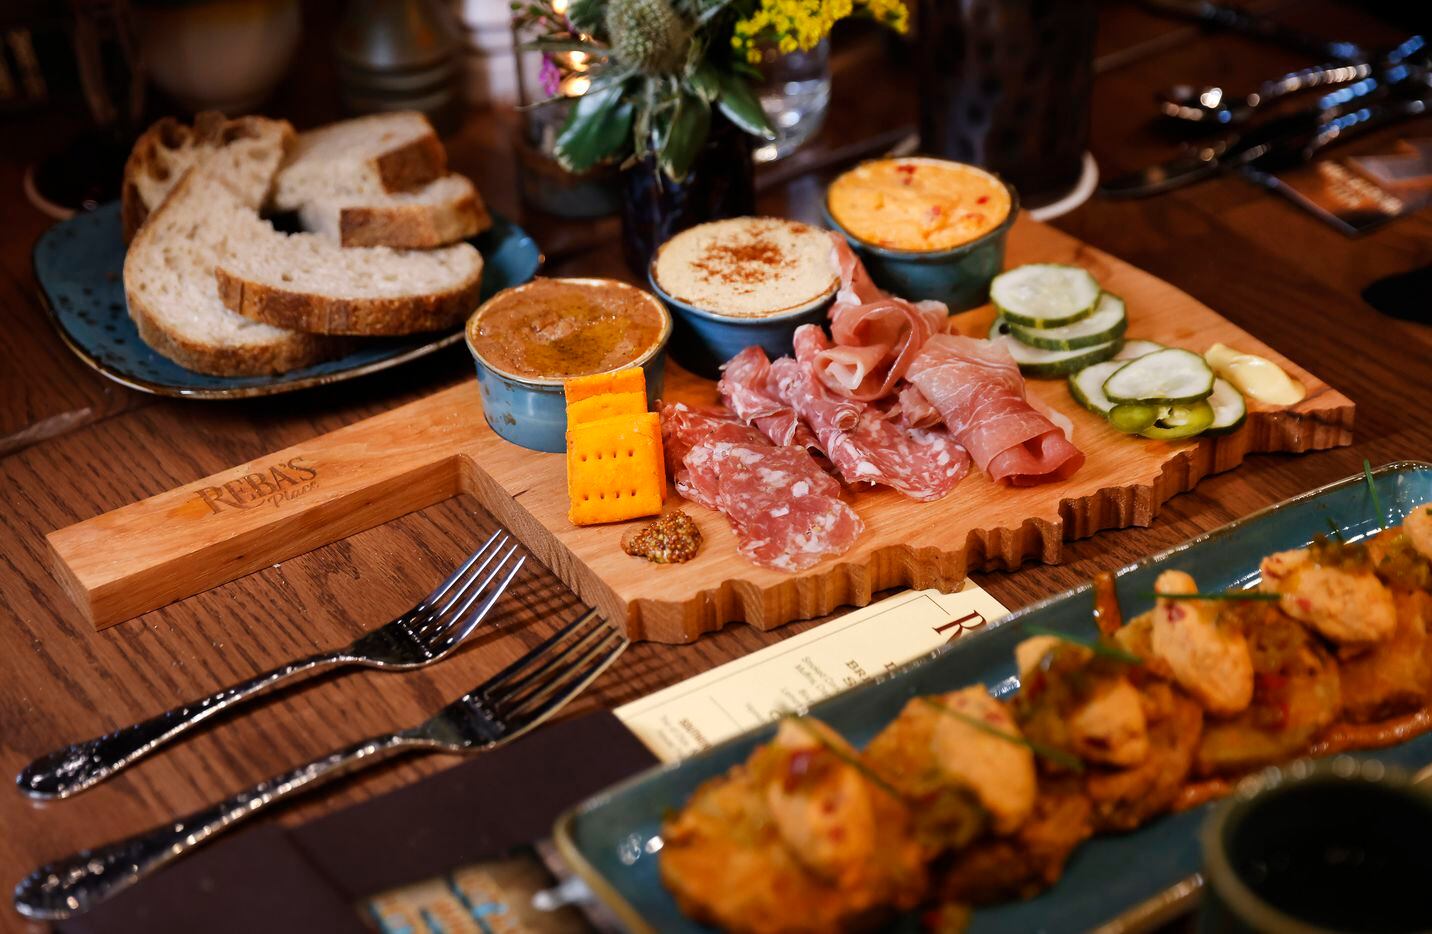 An Oklahoma-shaped charcuterie board full of meats and spreads is served at Reba’s Place in...